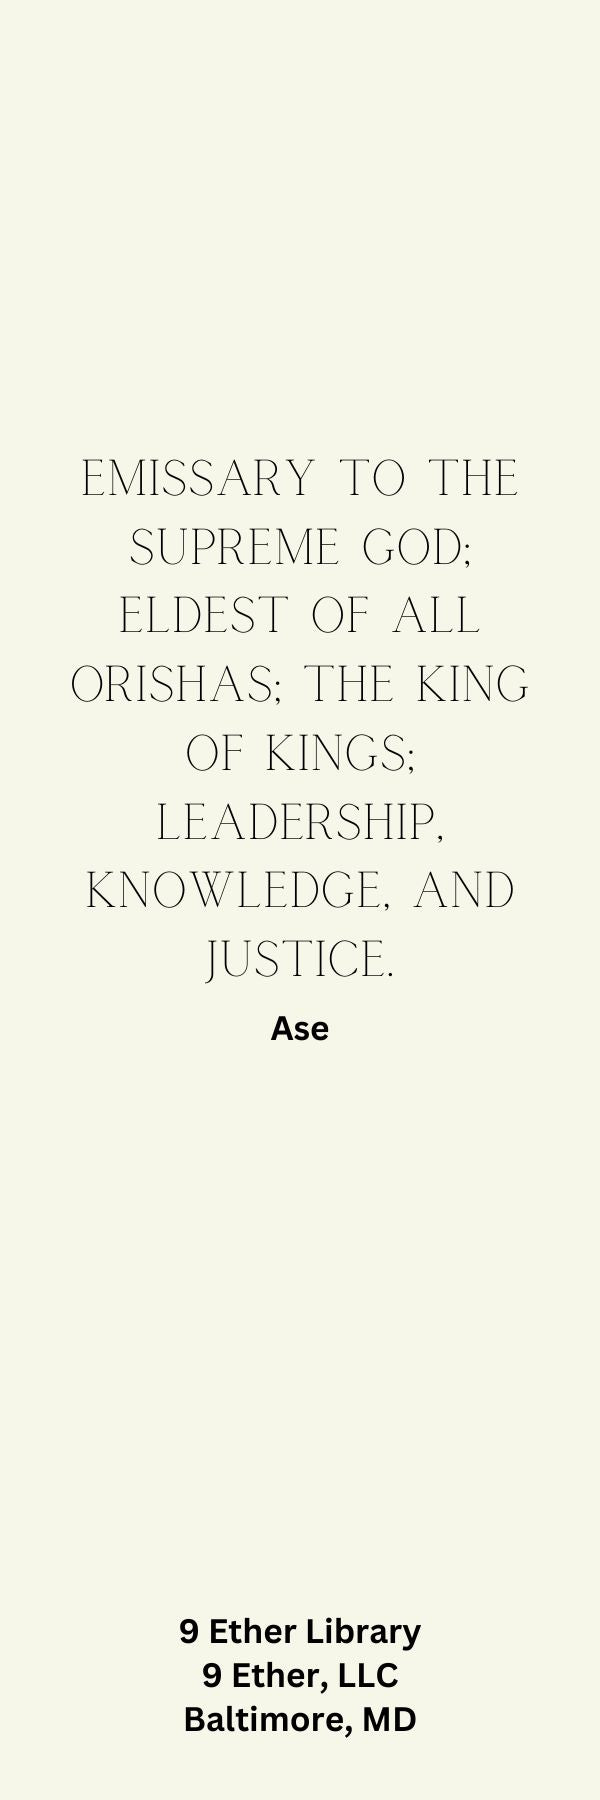 Emissary to the Supreme God; Eldest of all Orishas; The King of Kings; Leadership, knowledge and justice. Ase.